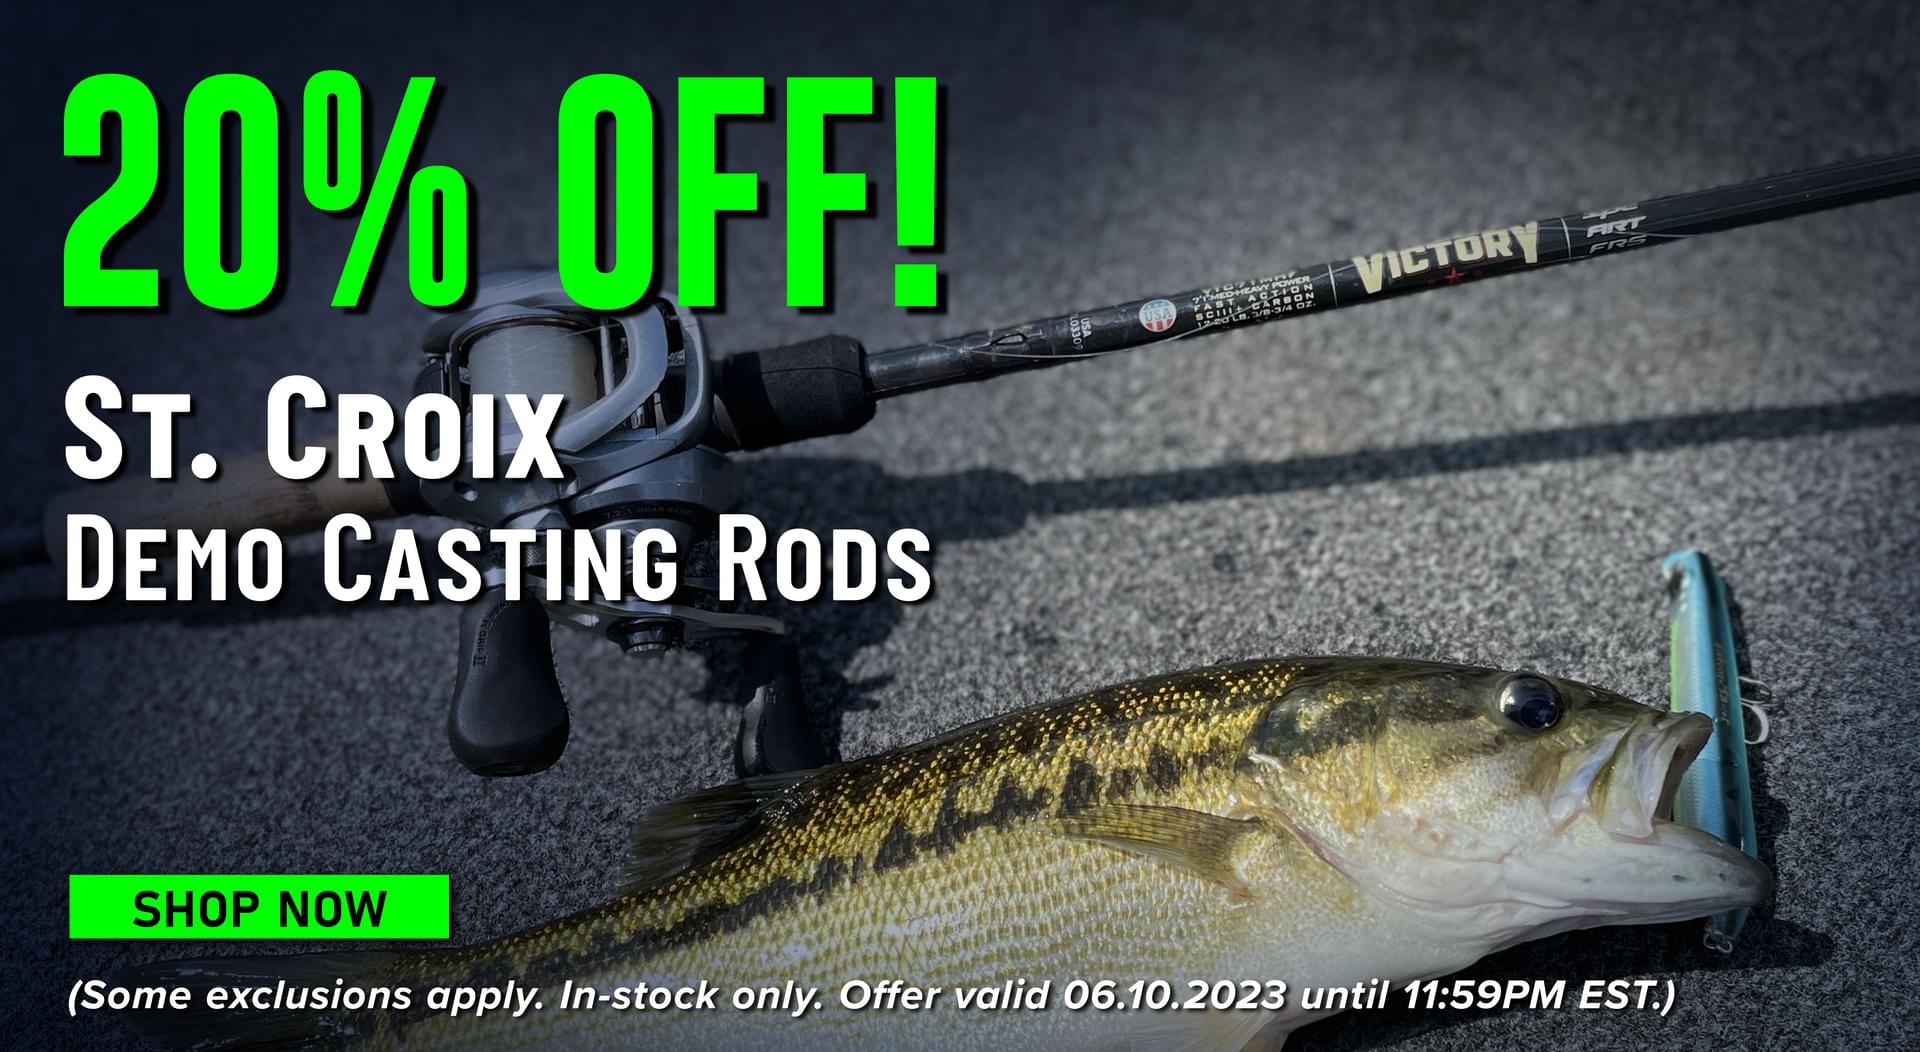 New Rods Just Added to This St. Croix Super Sale! - Fish USA